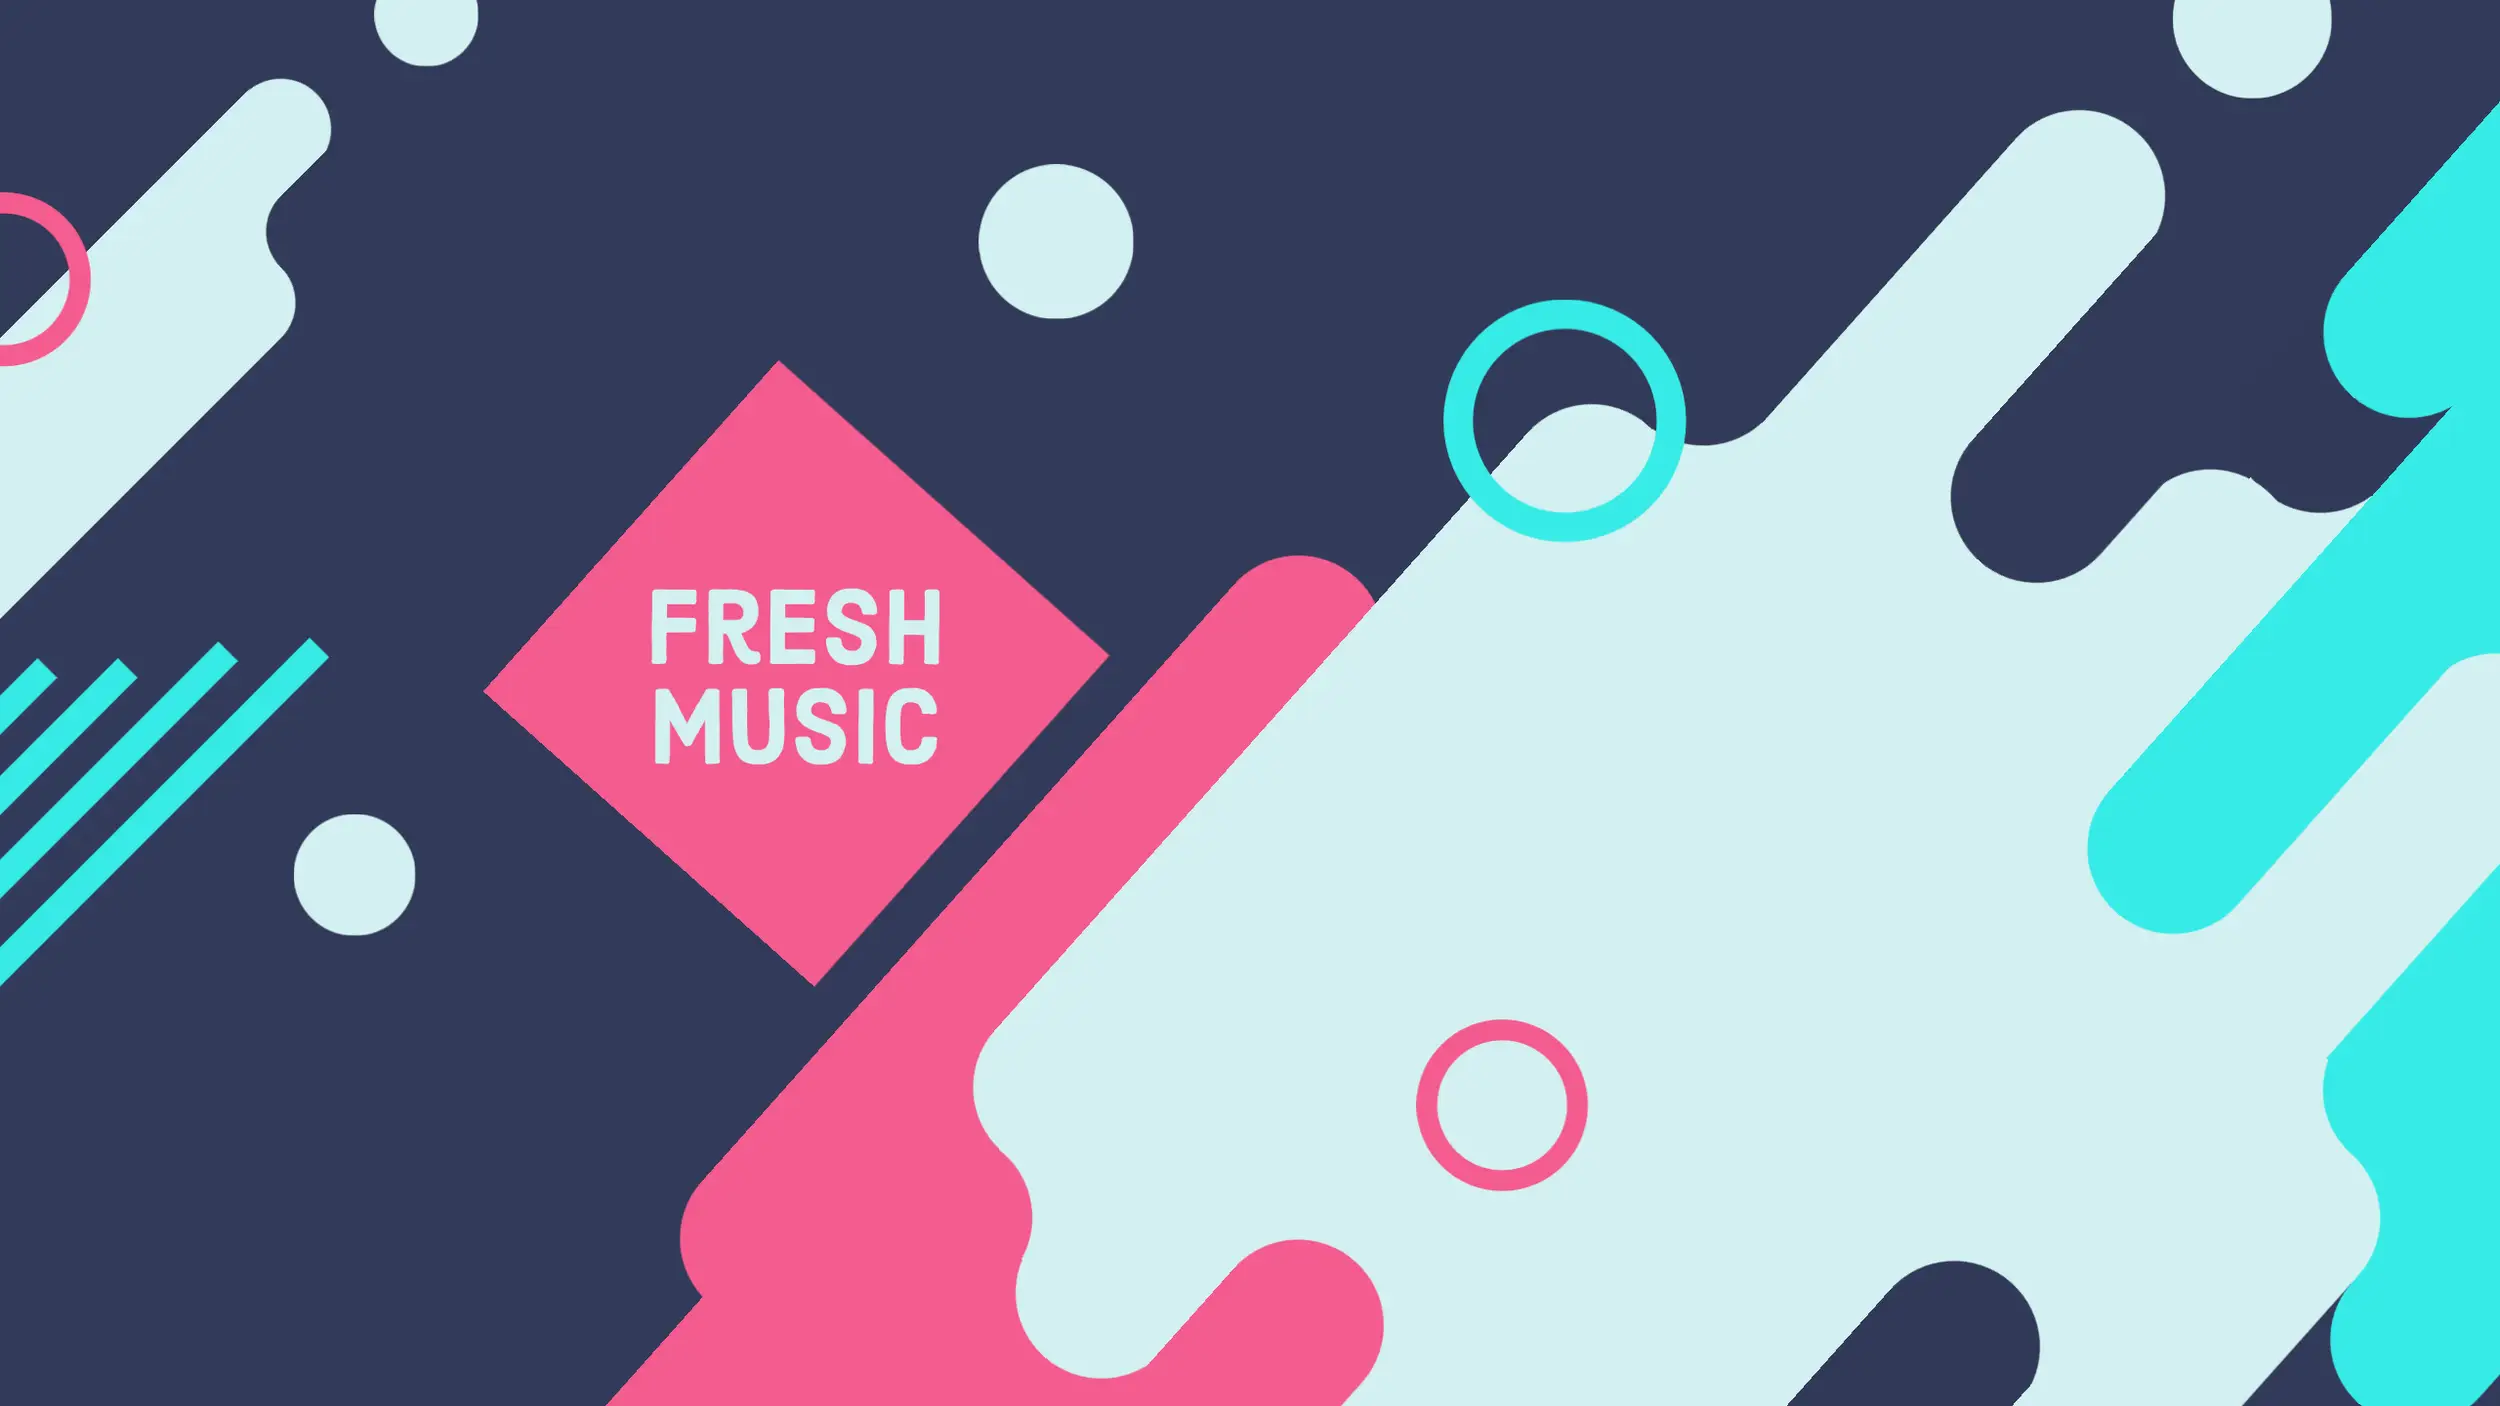 Best Music Promotion Services for New Artists